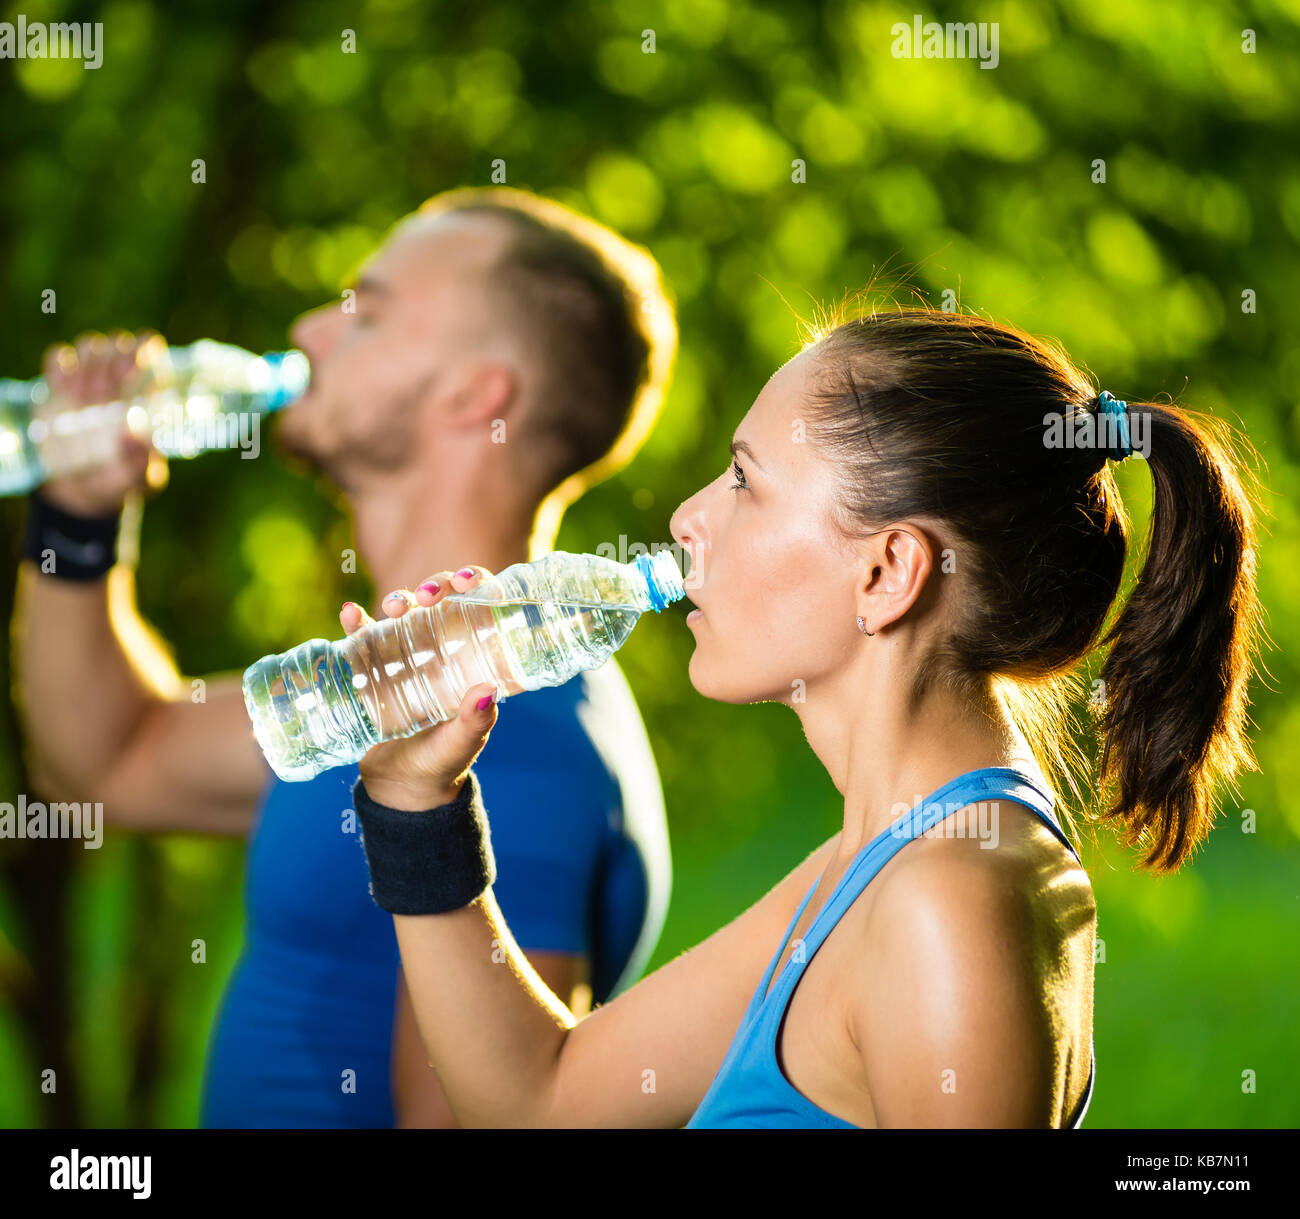 Man and woman drinking water from bottle after fitness sport exercise Stock Photo